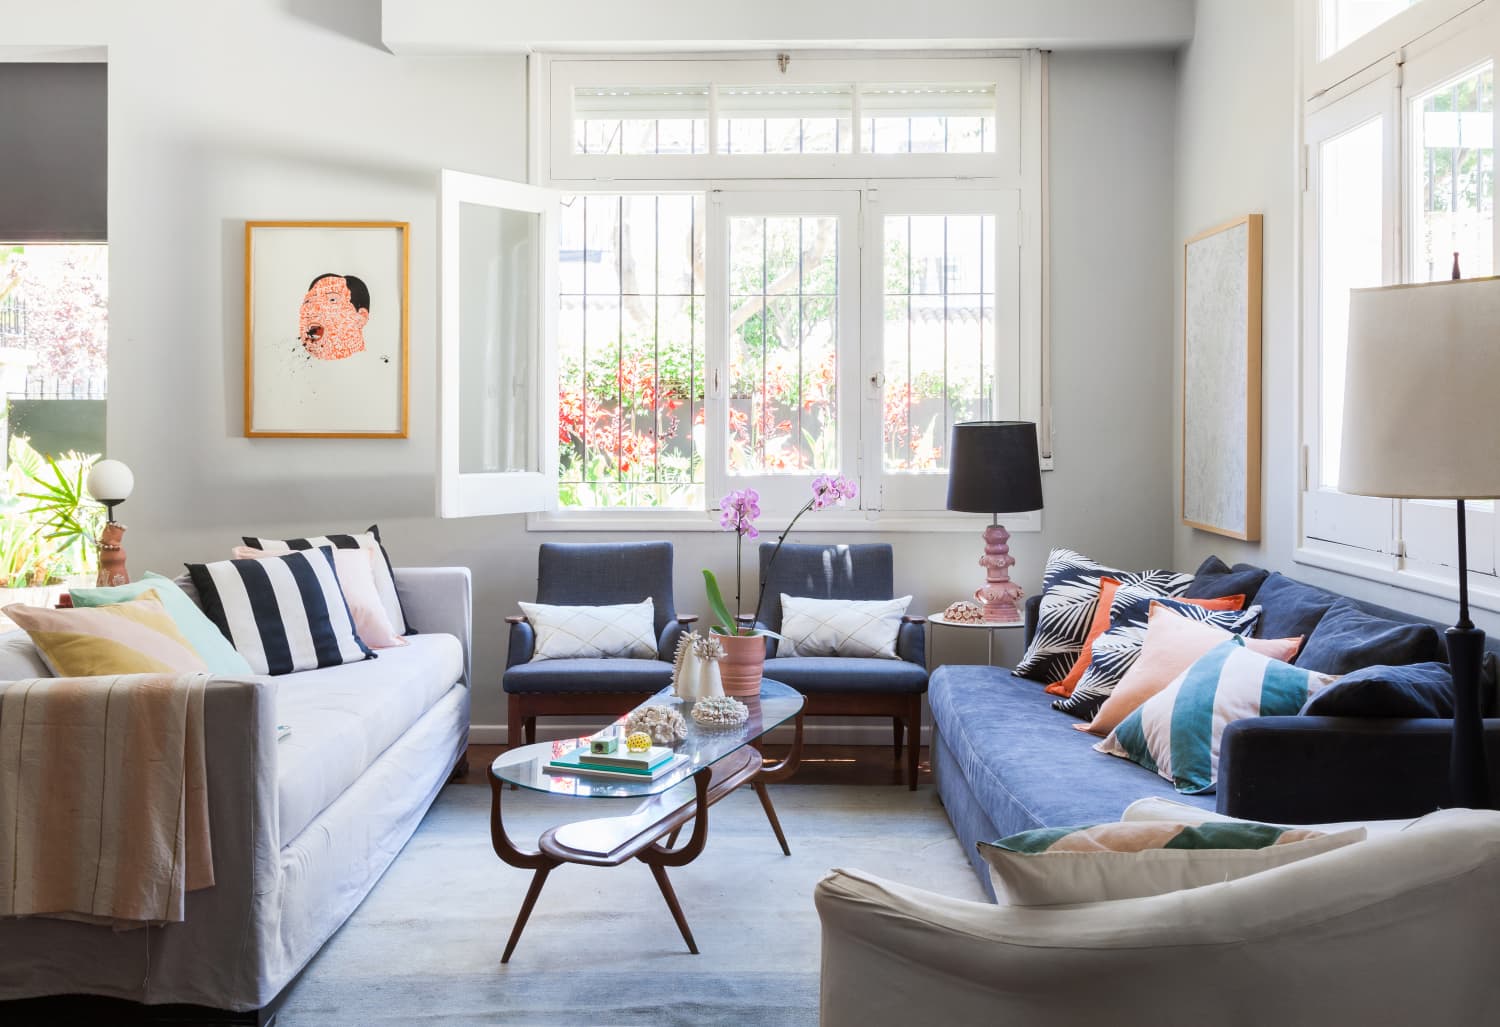 We Asked 15 Real Estate Pros What the Best Living Room Paint Color Is — Here’s What They Said